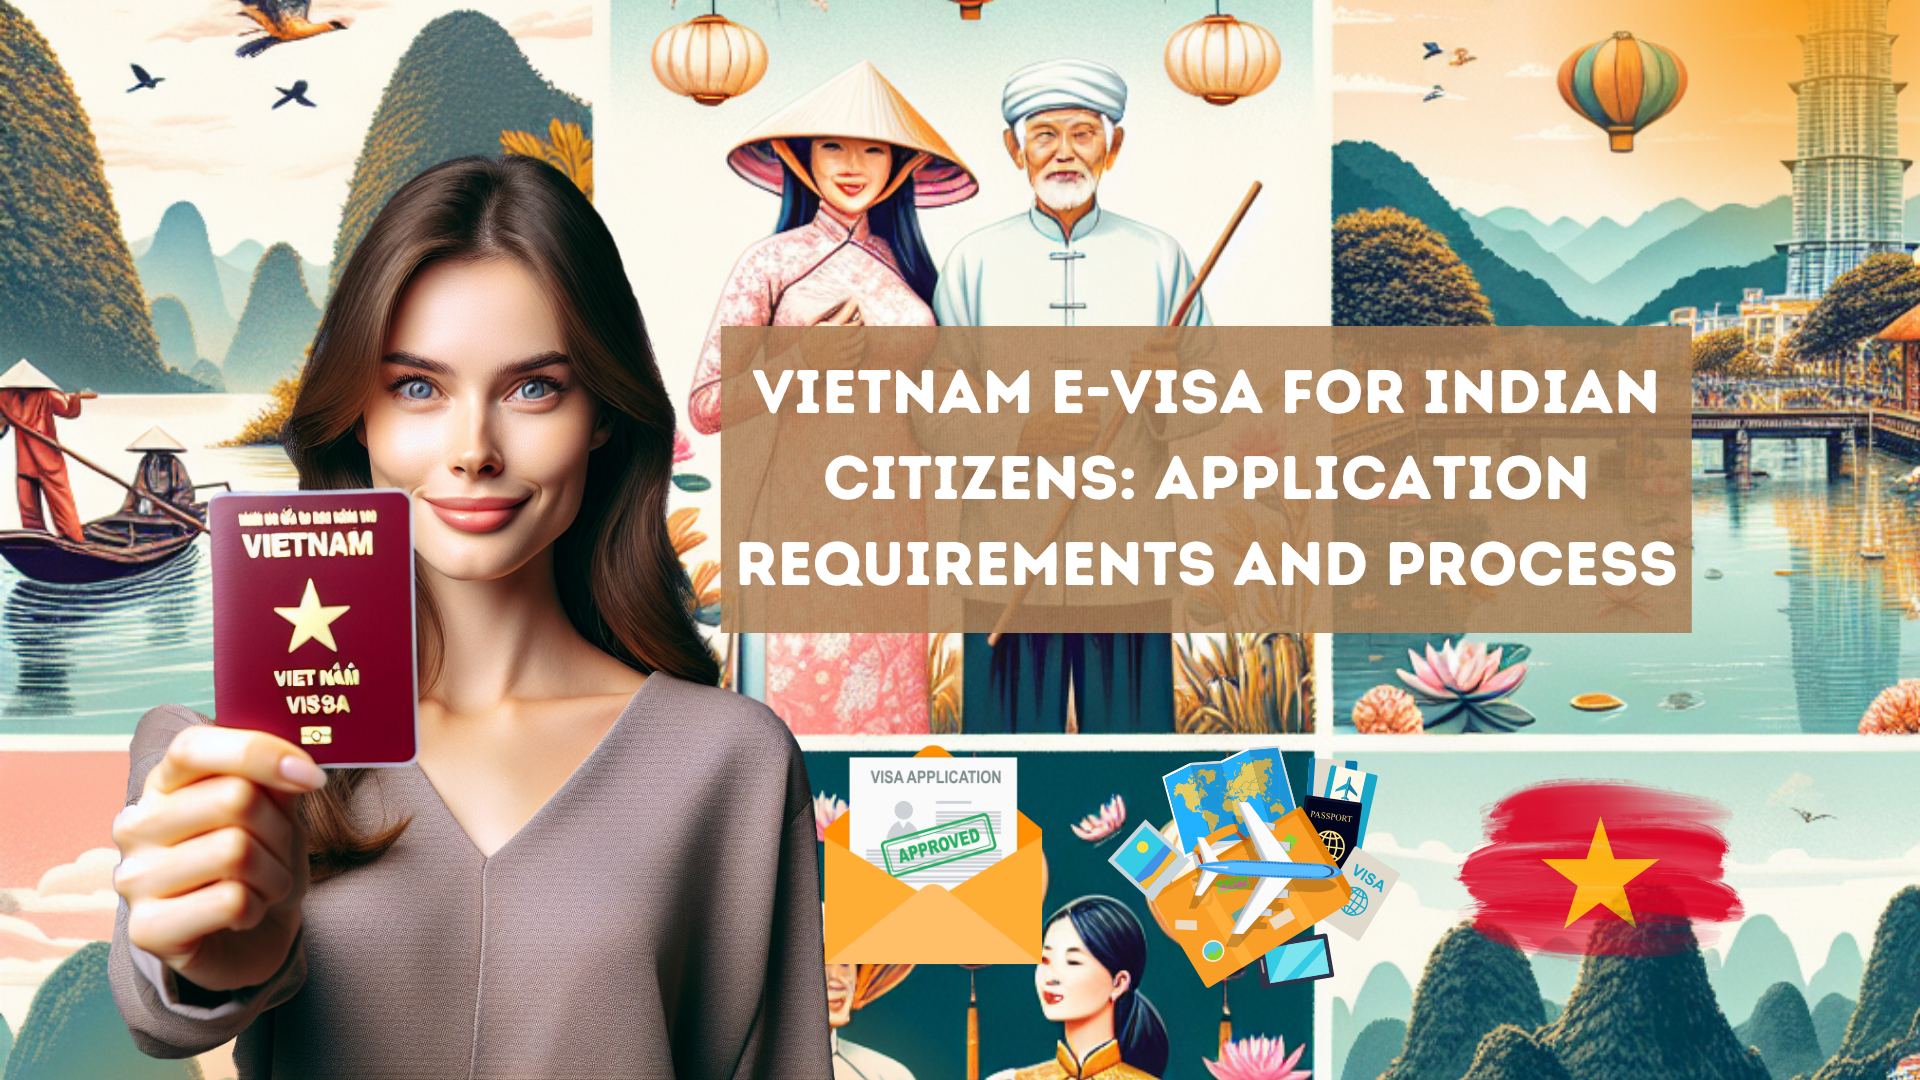 Vietnam e-visa for Indian Citizens: Application Requirements and Process